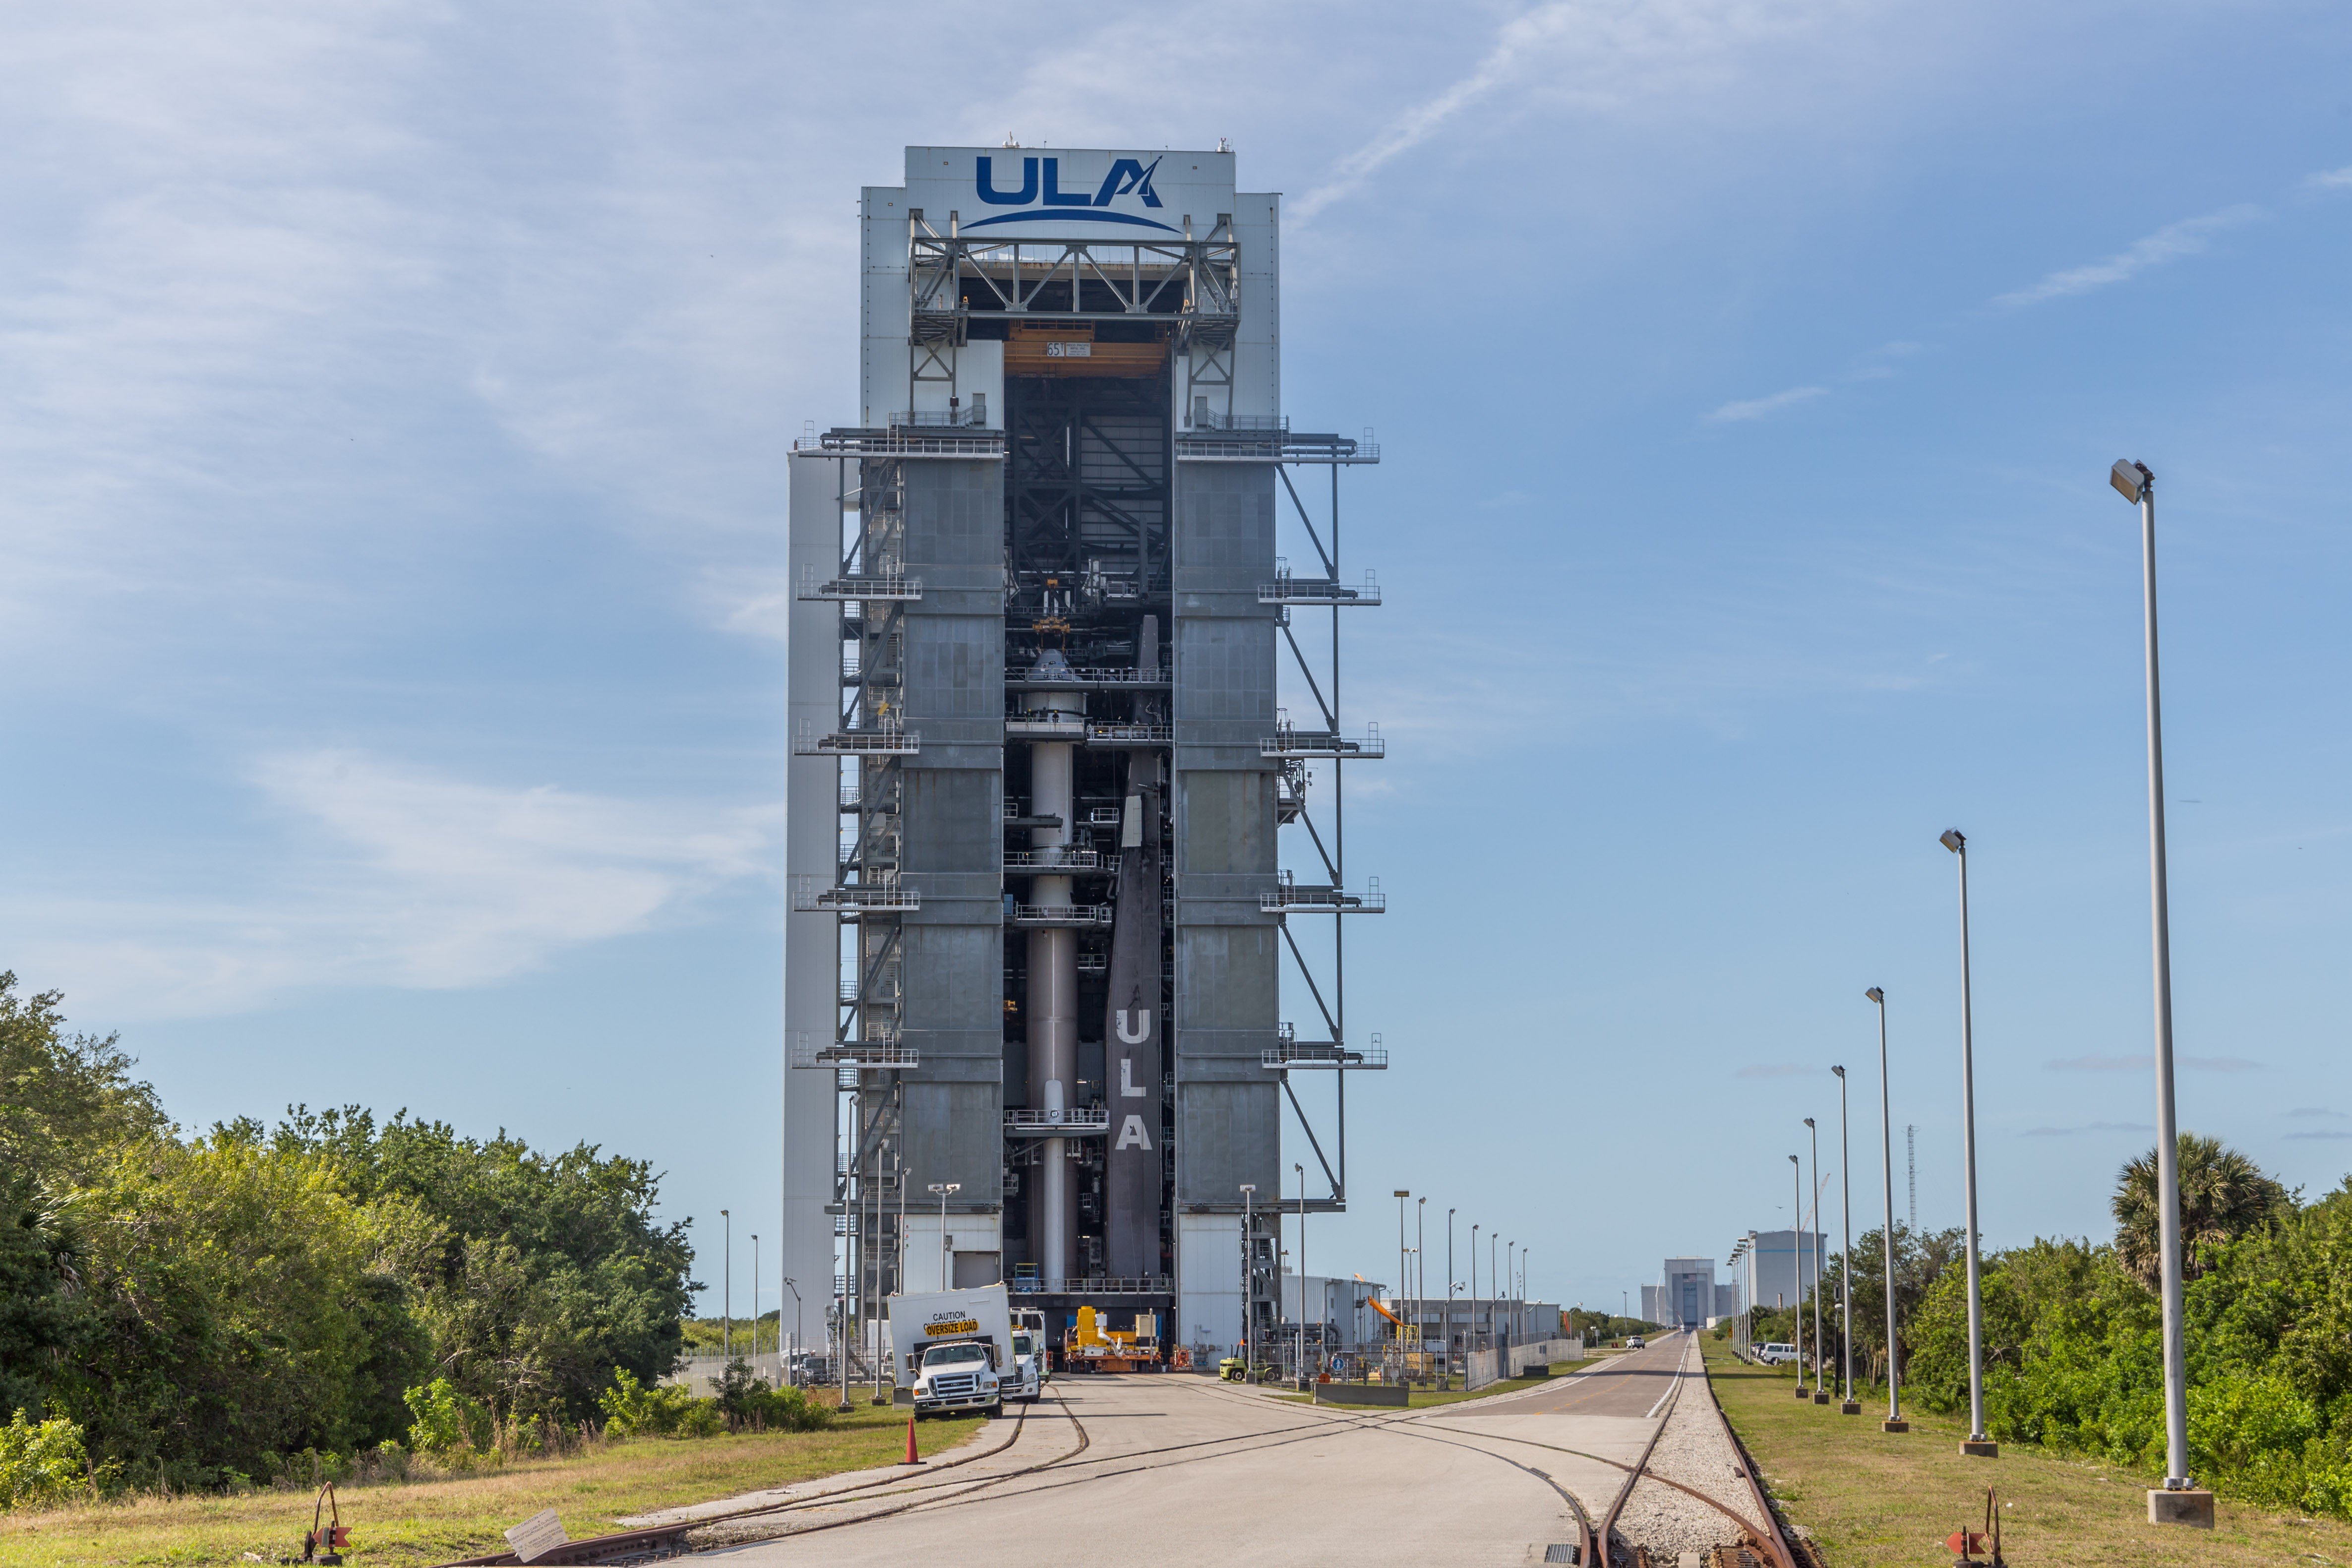 Atlas V and Starliner stand ready for CFT. Photo by United Launch Alliance